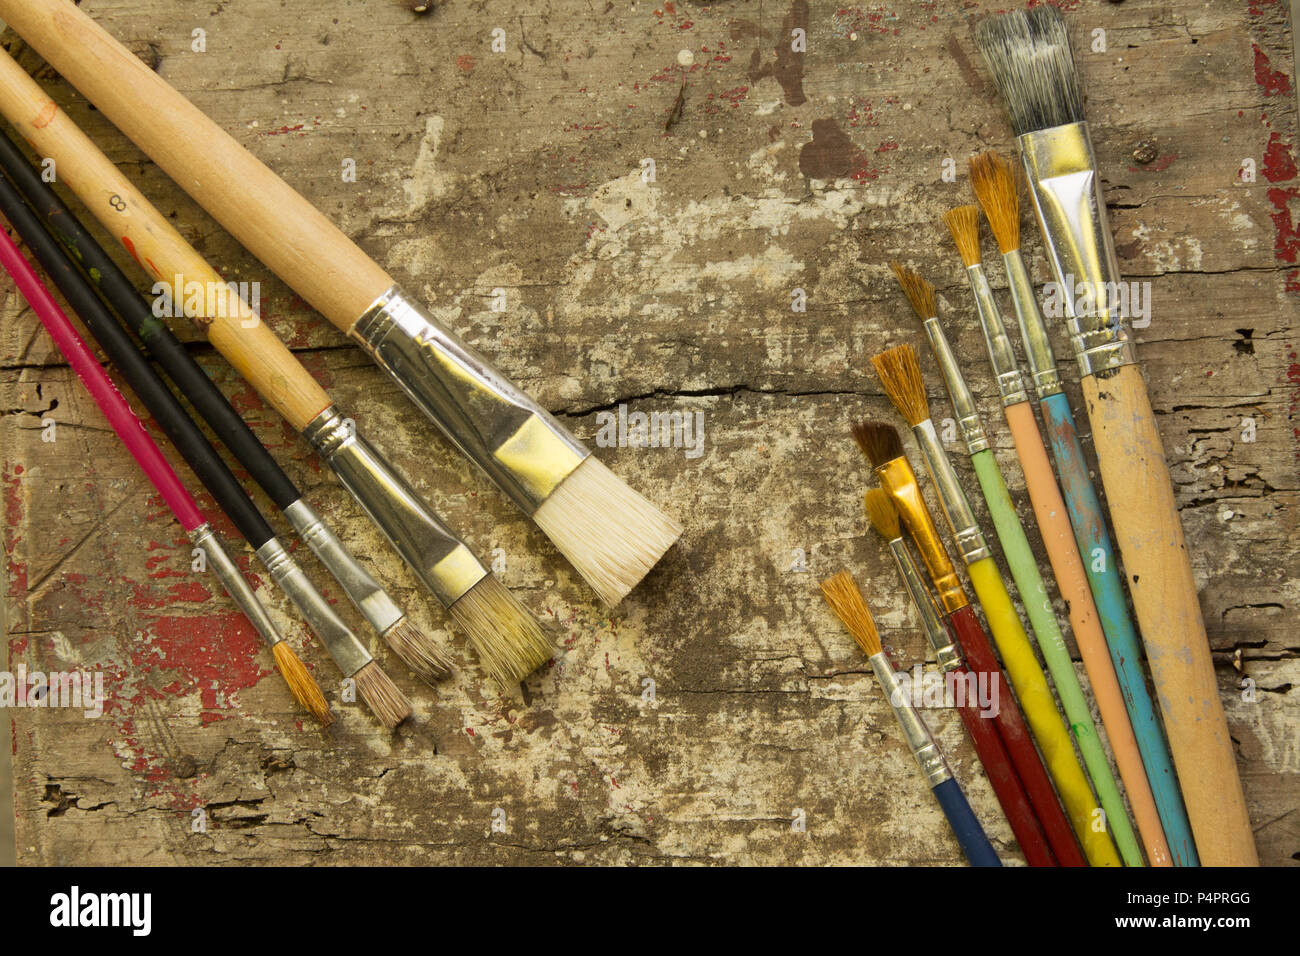 different size paint brushes on a rustic wood table, artist workshop Stock Photo